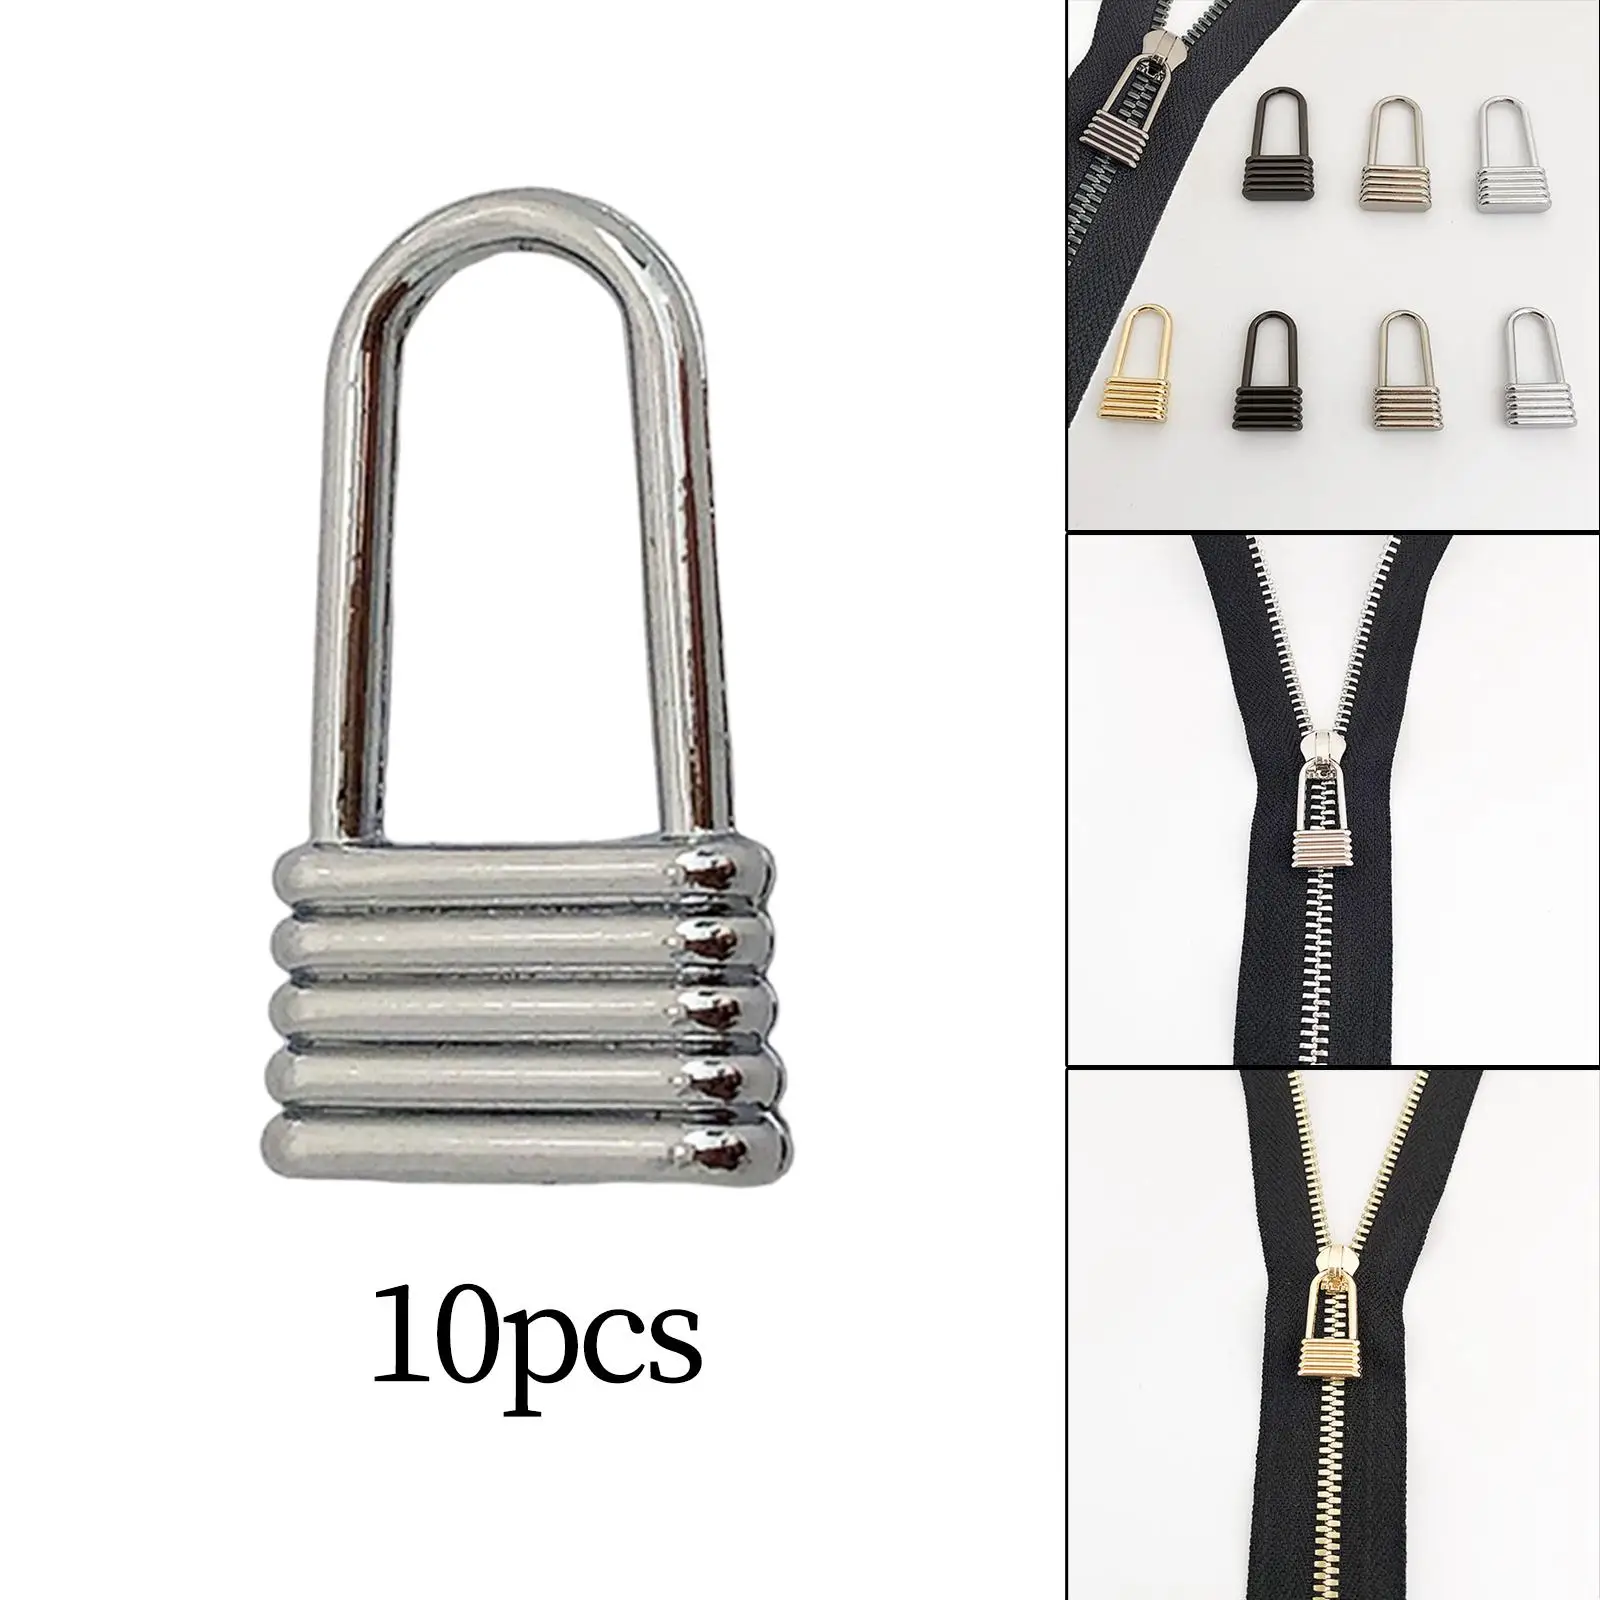 10Pcs Zinc Alloy Zipper Heads Pull Tab Zip Tags Replacement Sewing Mend Handle Zipper Pulls for Jacket Skirt Backpack Bags Coat